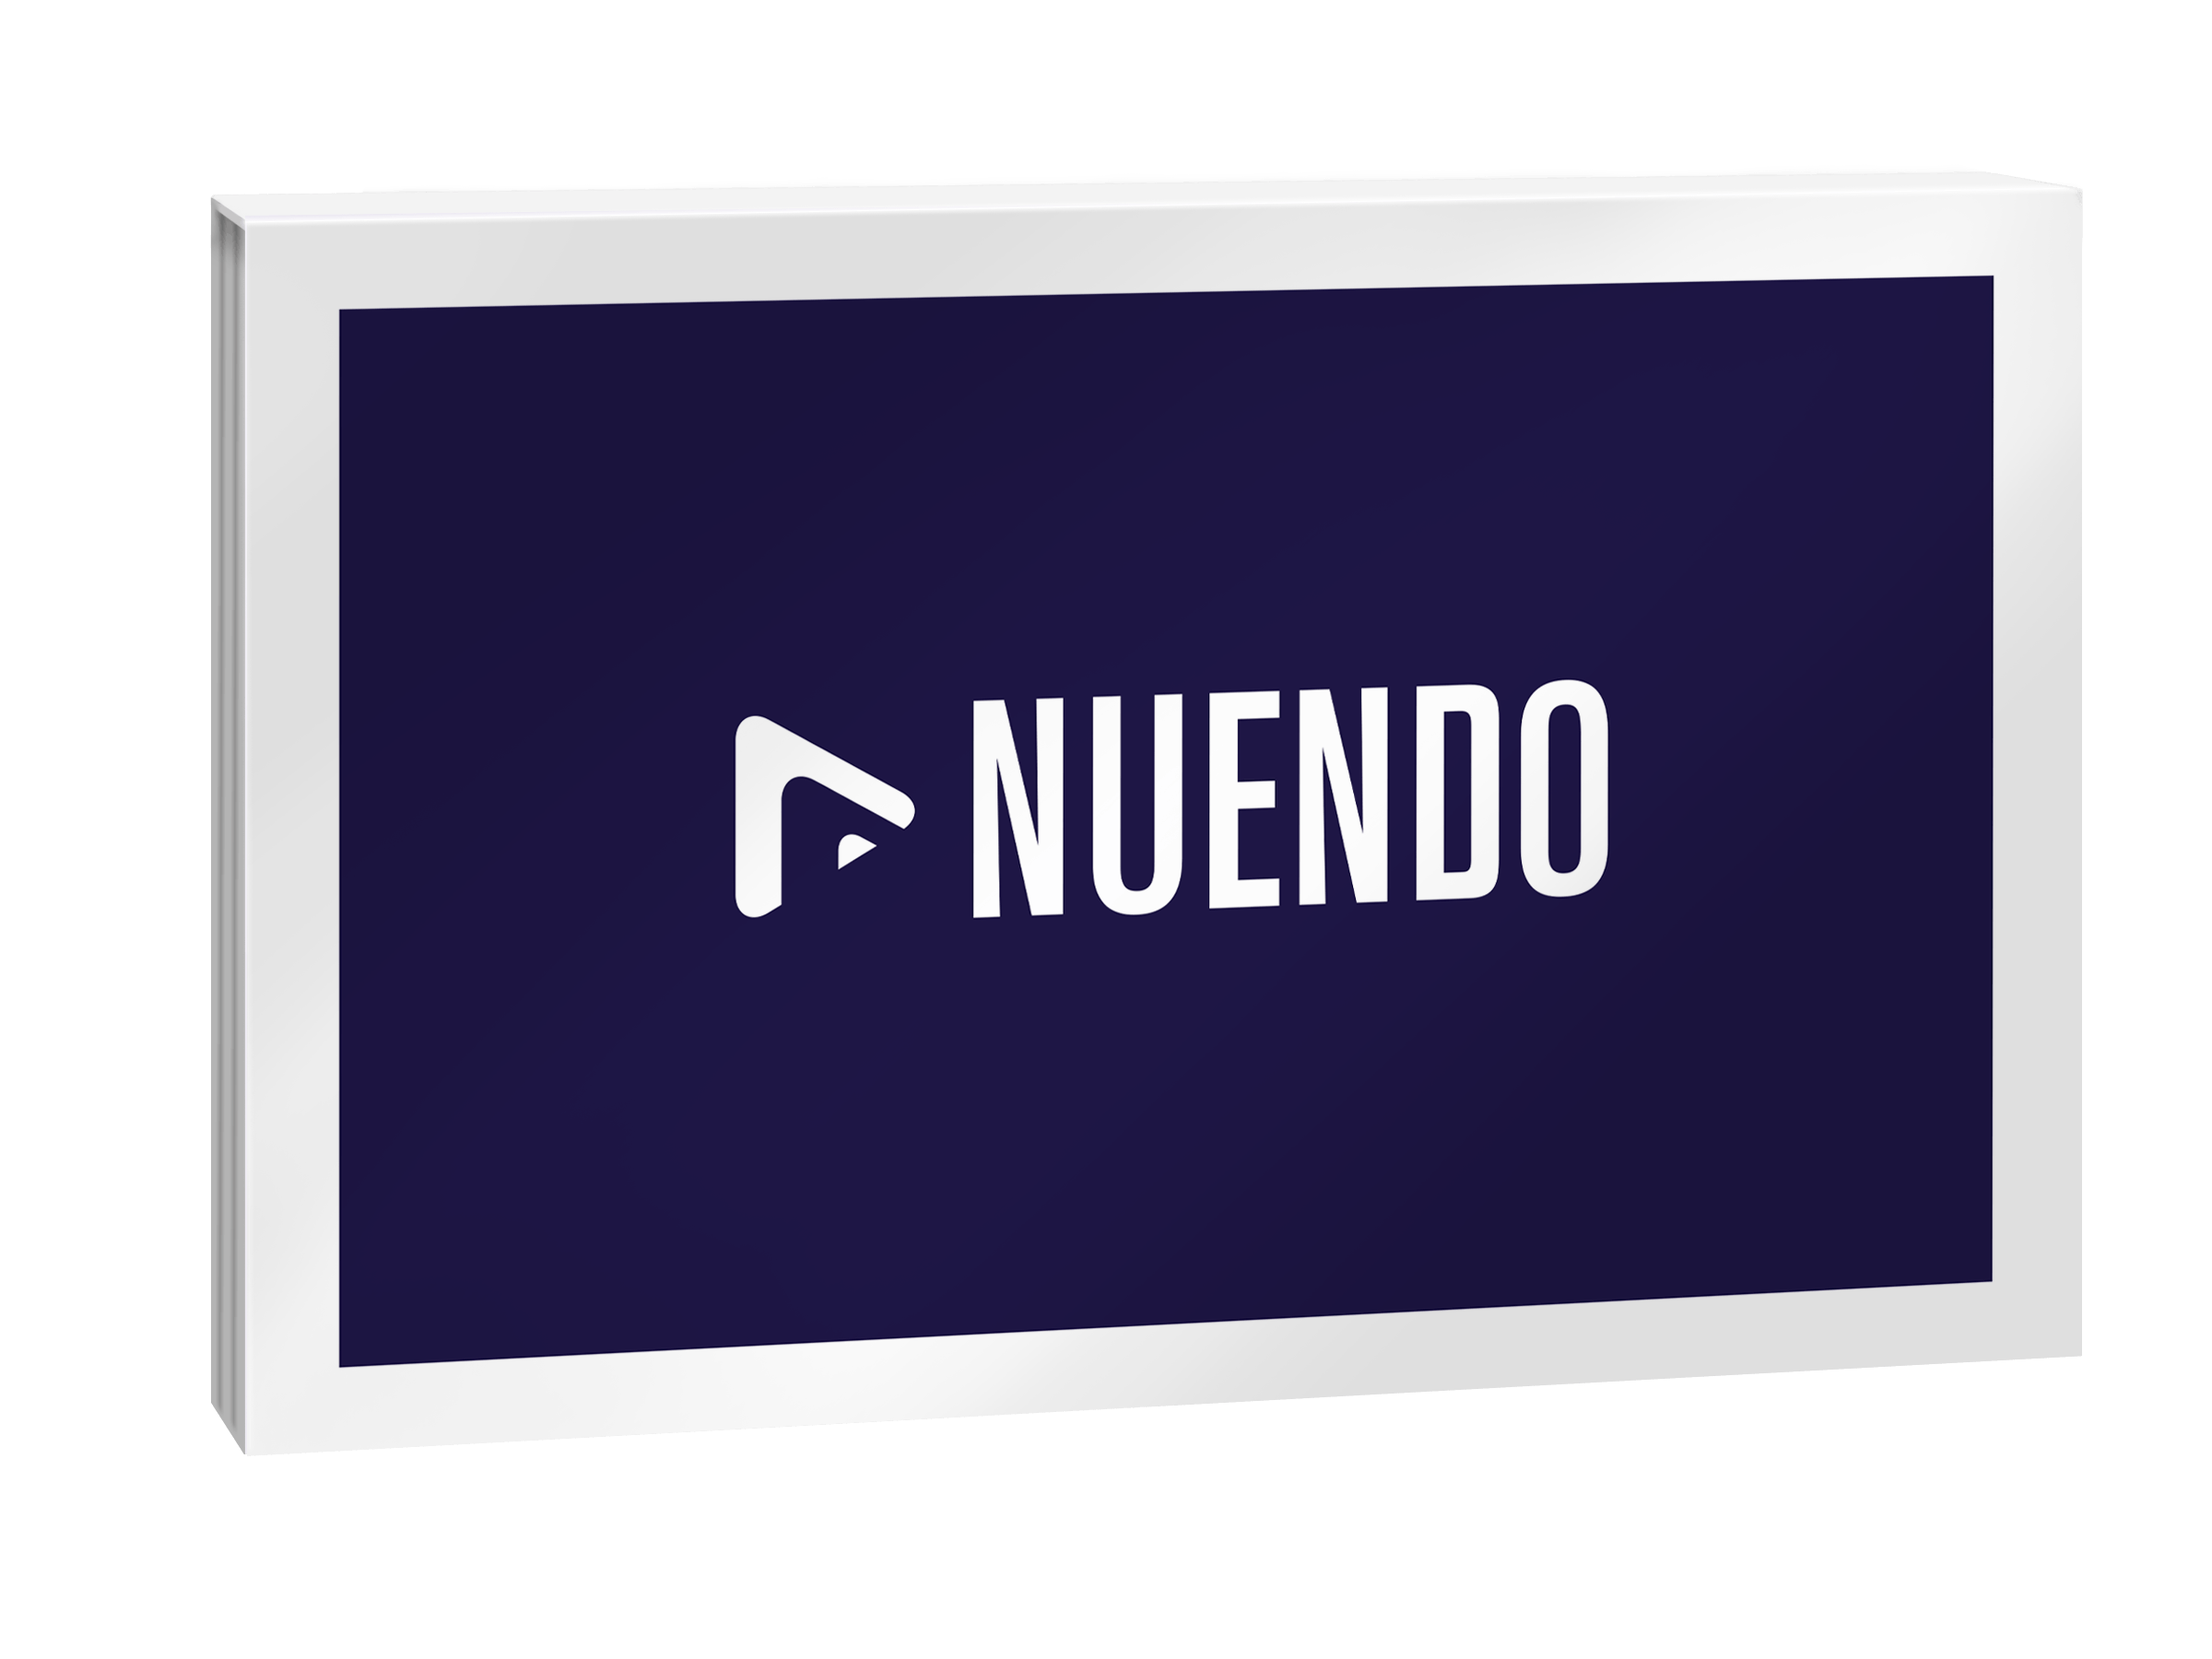 download the new for windows Steinberg Nuendo 12.0.70